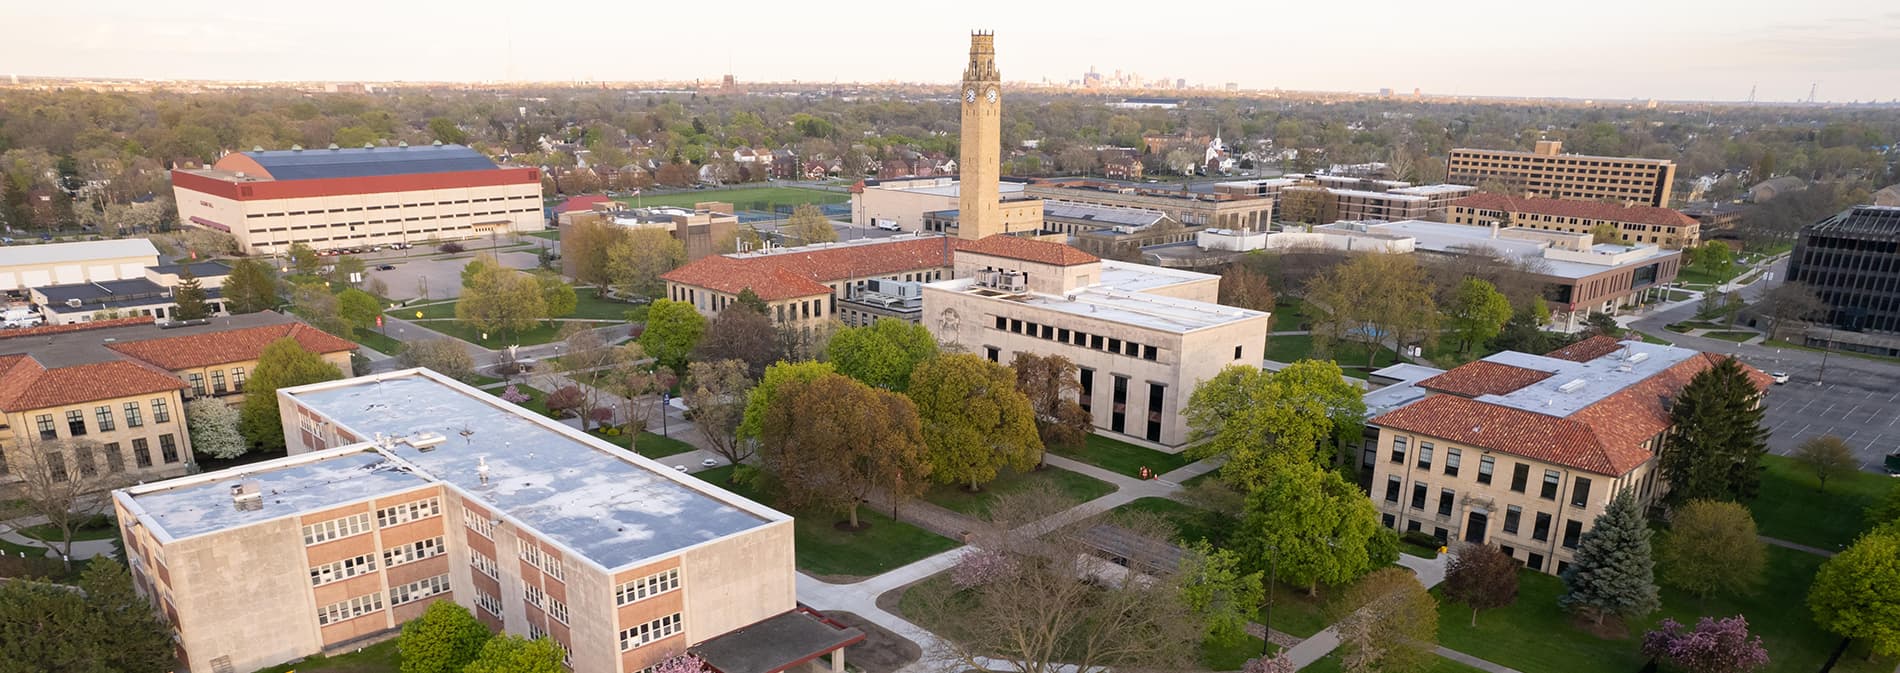 An aerial photograph of Detroit Mercy's McNichols Campus, featuring the city of Detroit skyline far off in the distance.